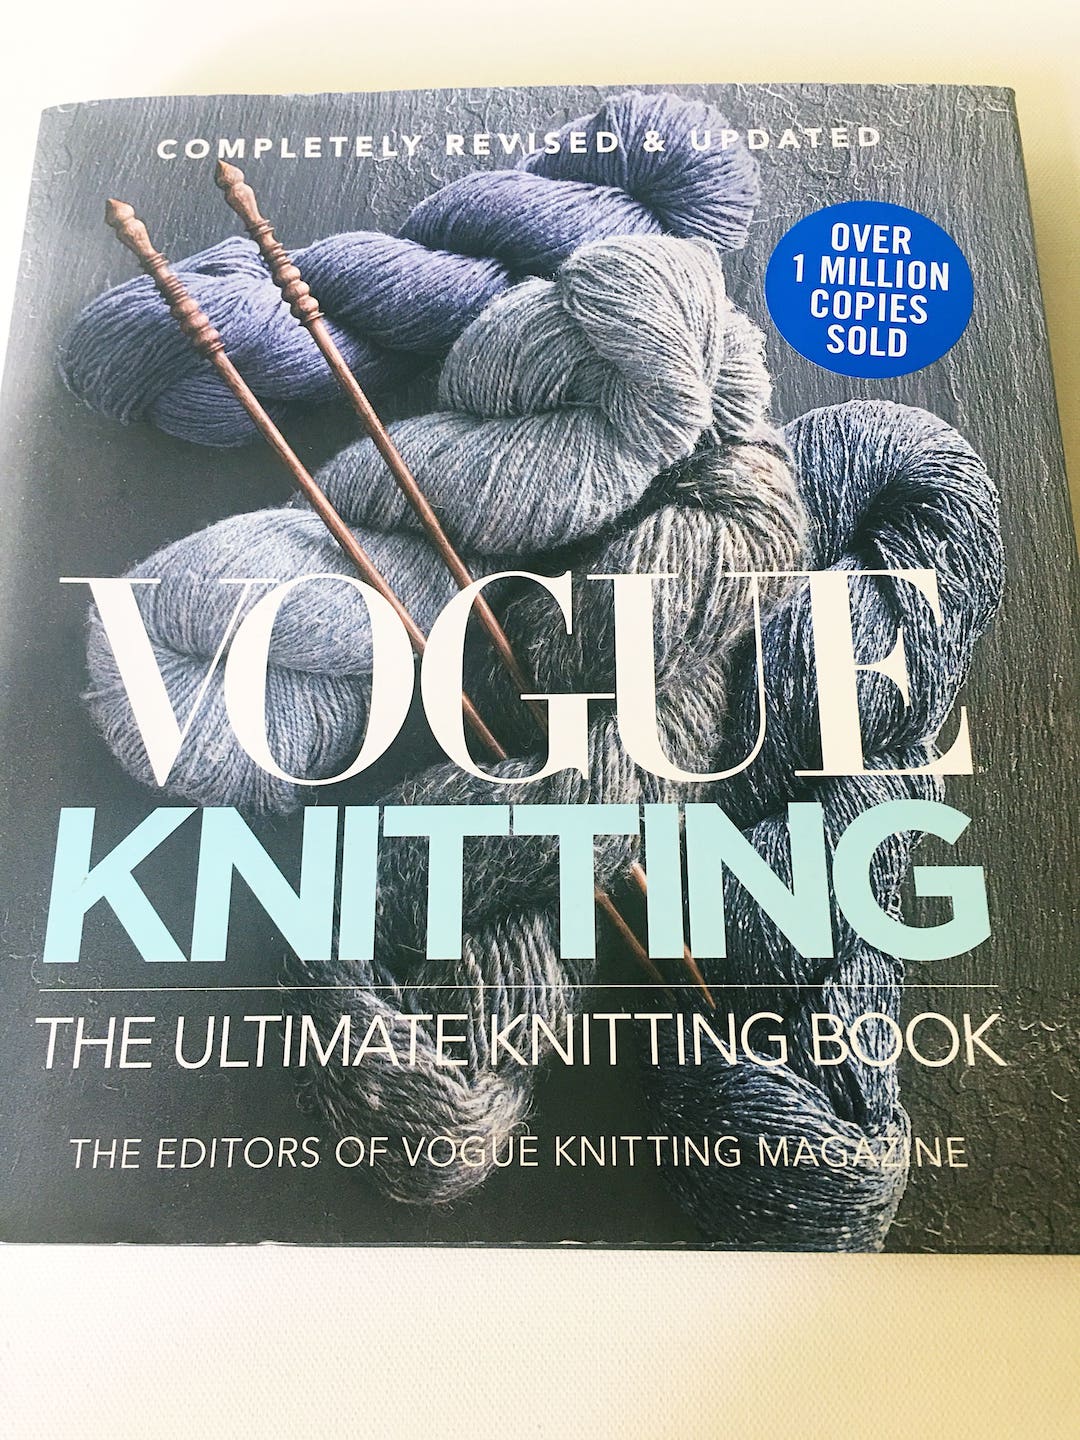 Vogue Knitting - The Ultimate Knitting Book - Woolswap